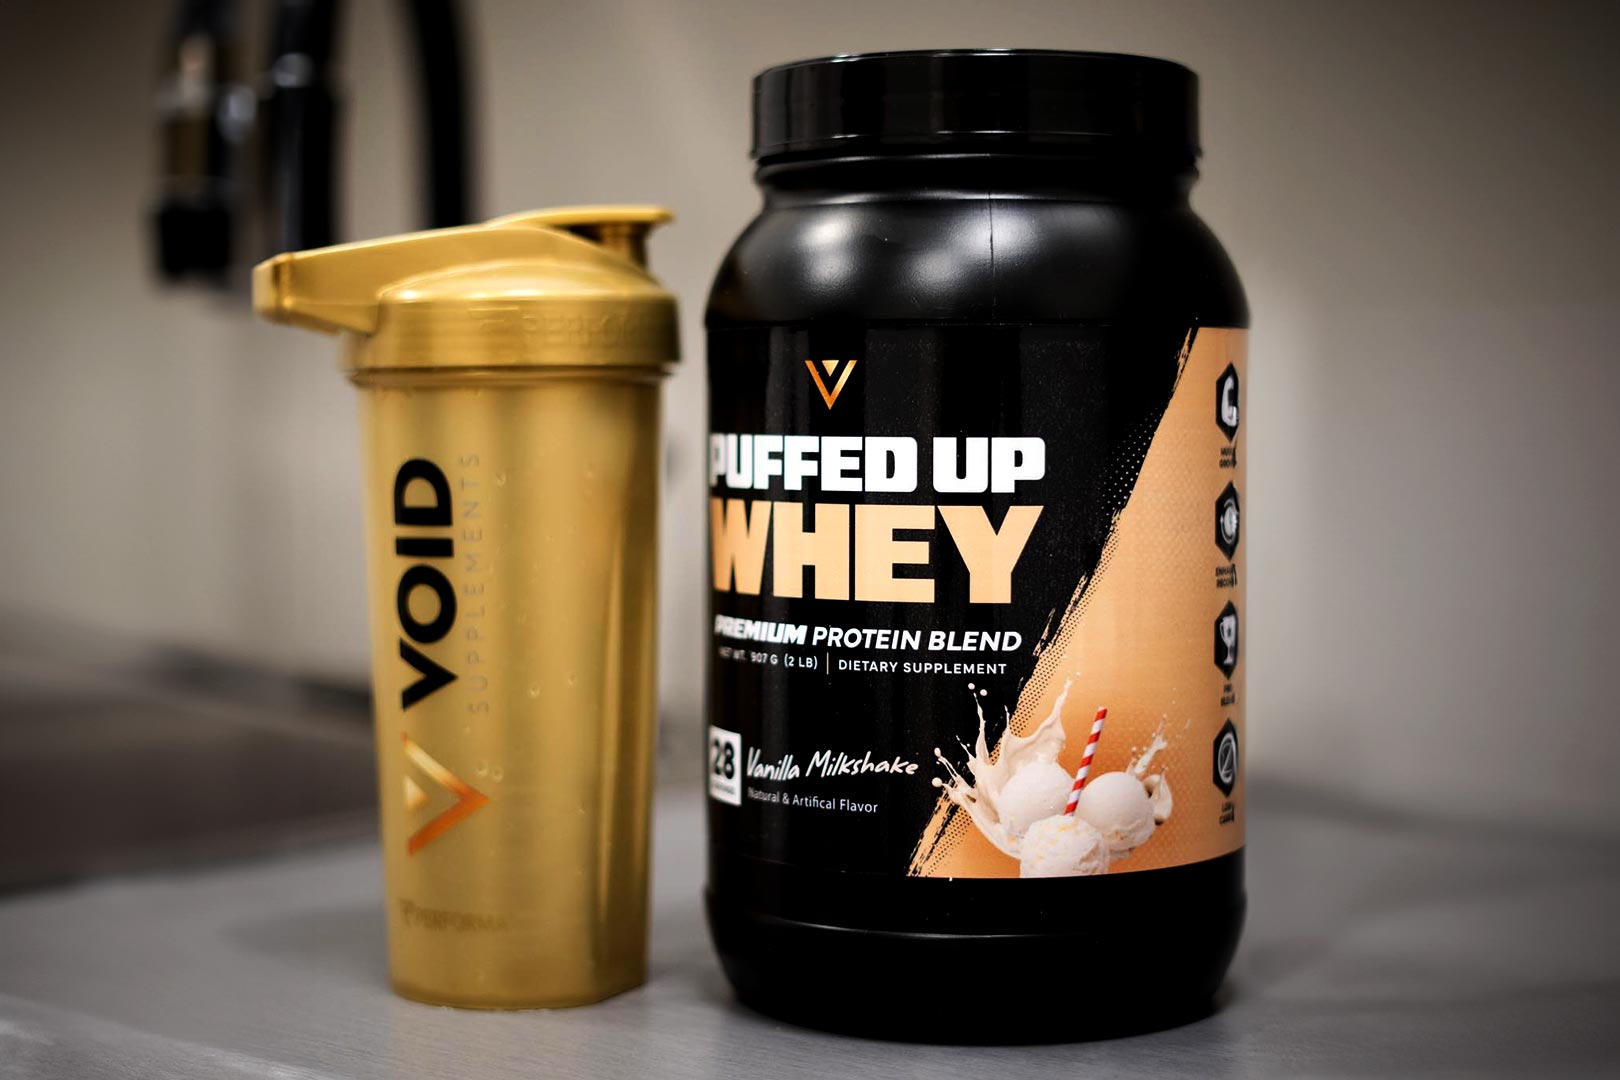 Void Supplements Puffed Up Whey